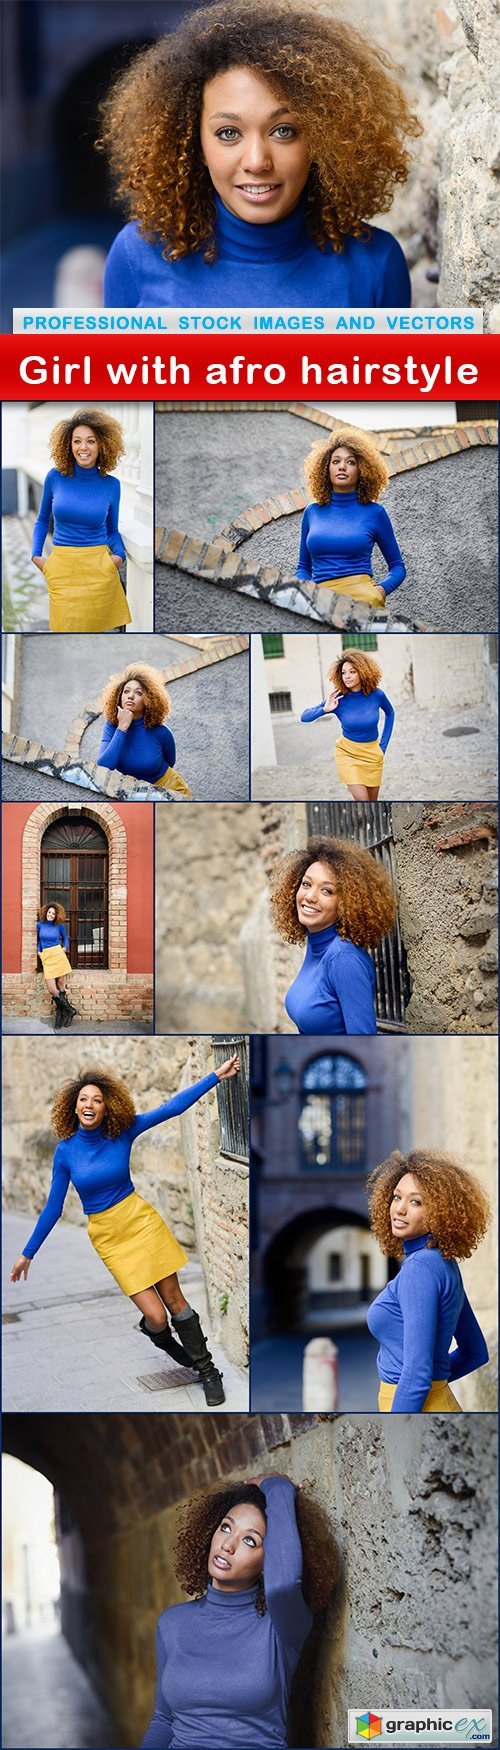 Girl with afro hairstyle - 10 UHQ JPEG